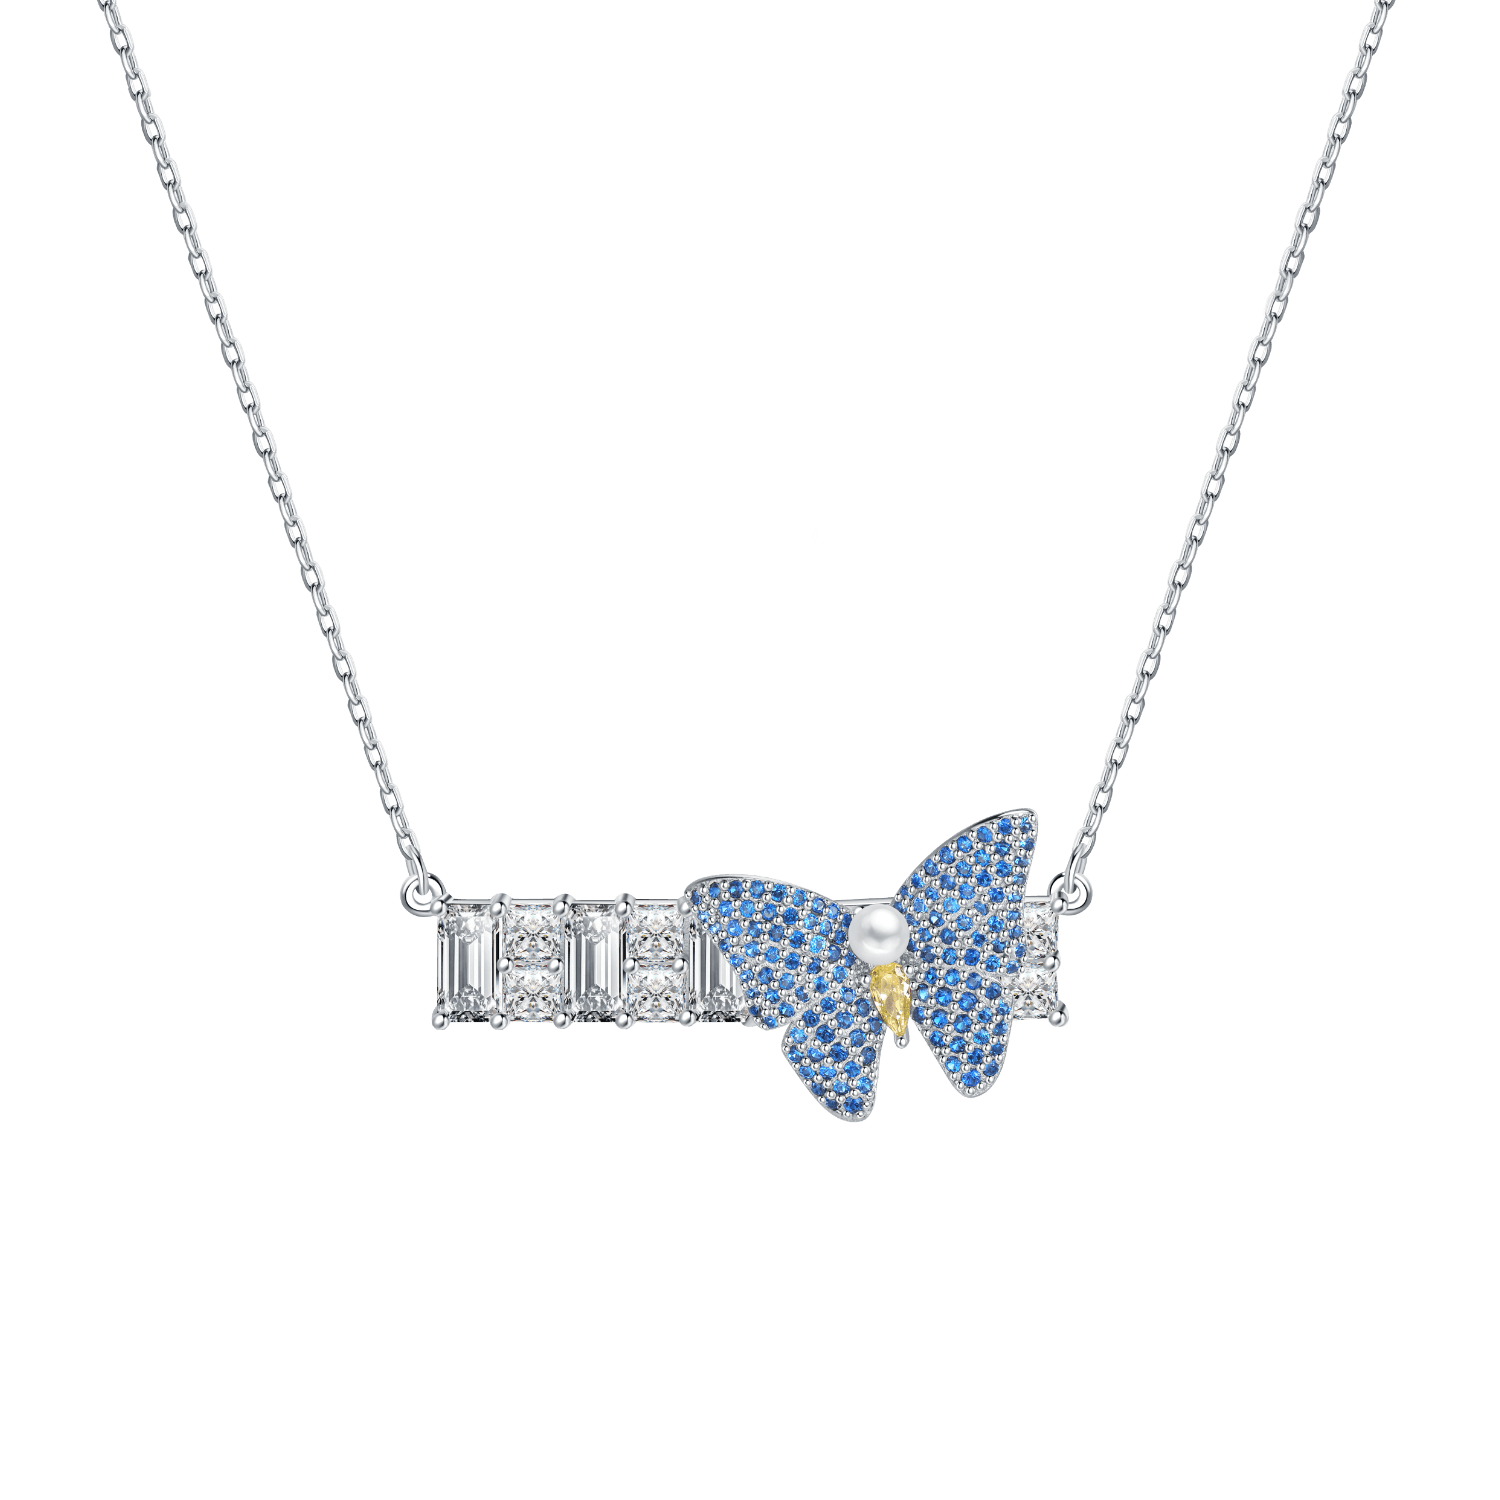 Colorful Butterfly Pendant Necklace